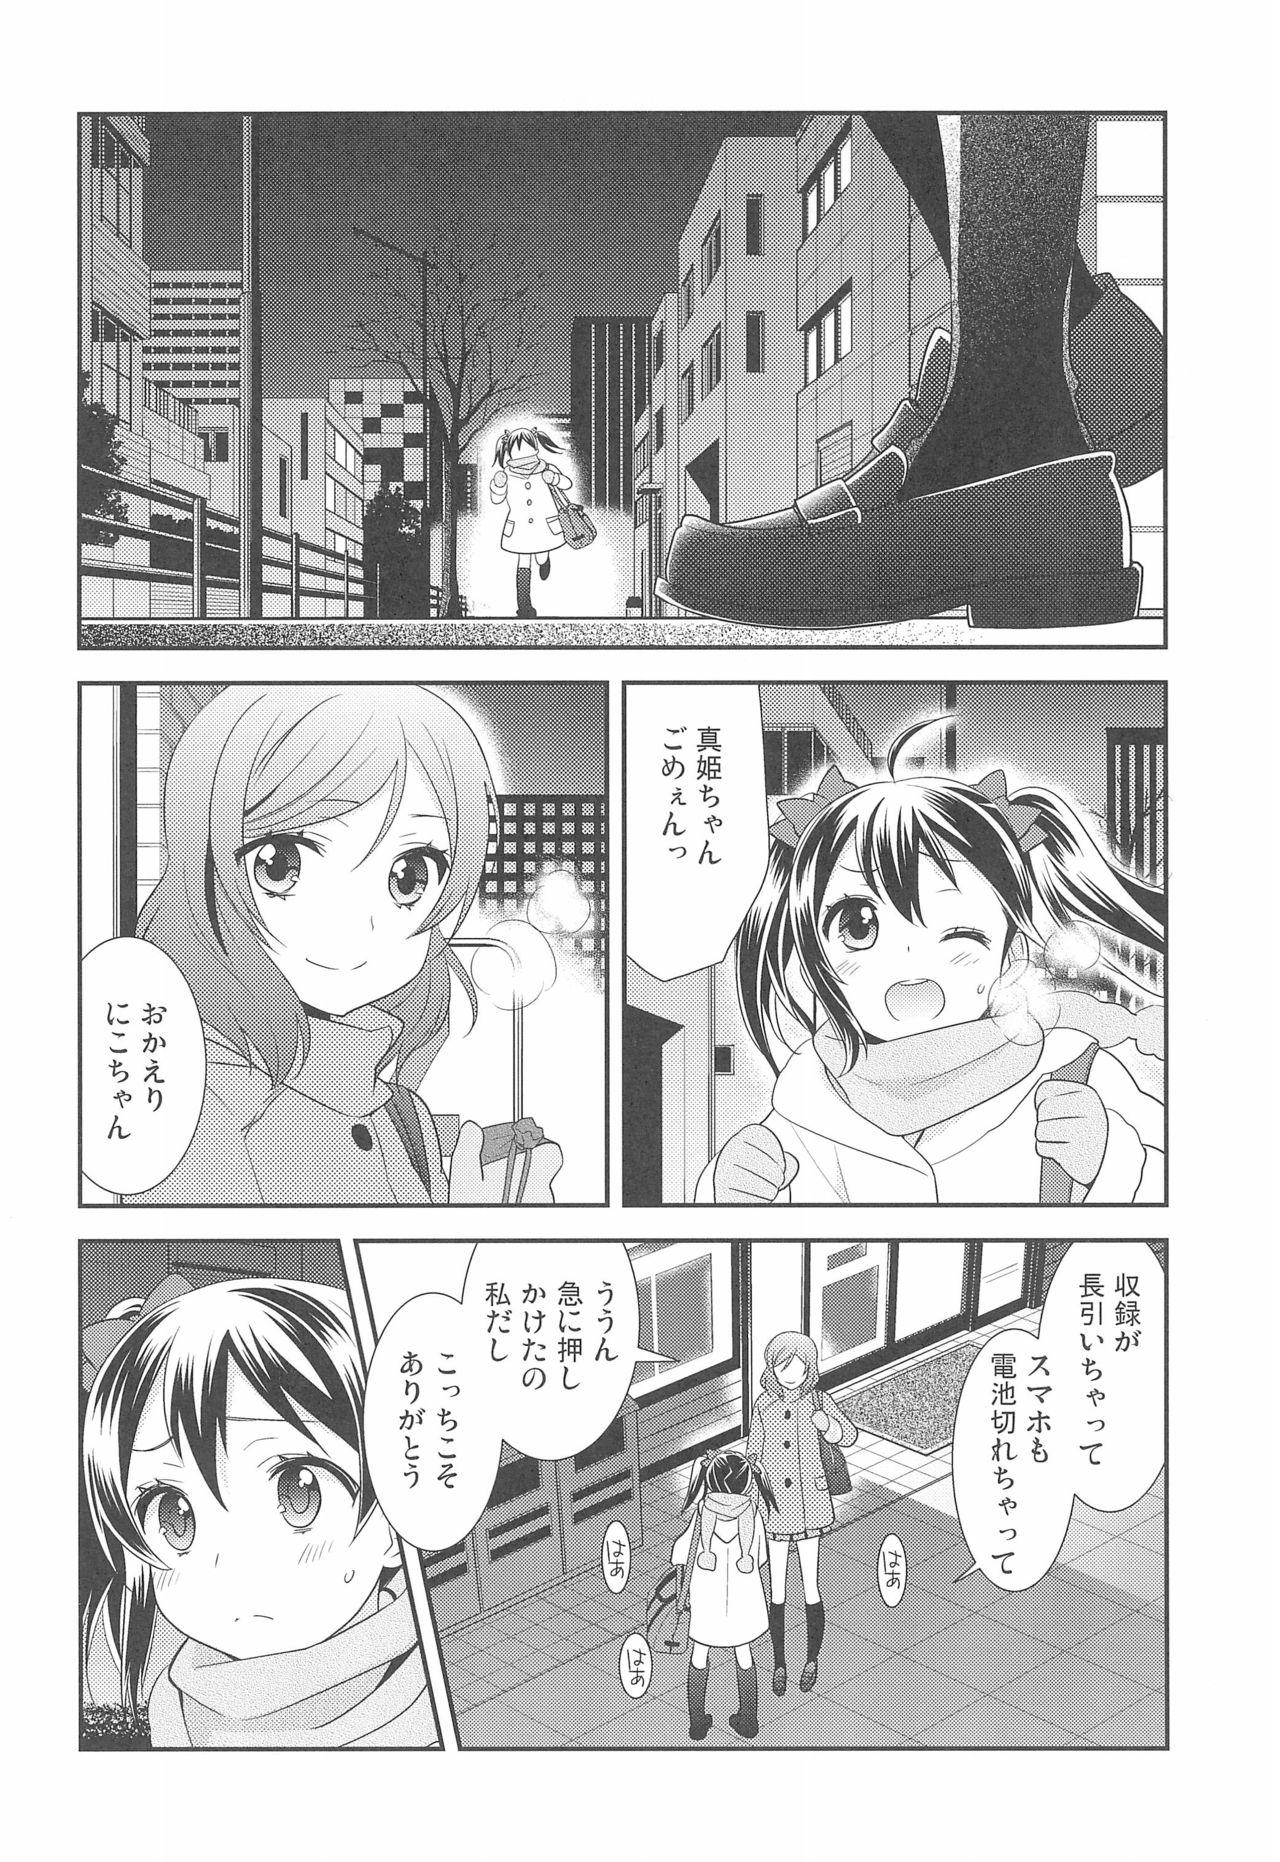 Gays BABY I LOVE YOU - Love live Fucking Sex - Page 4